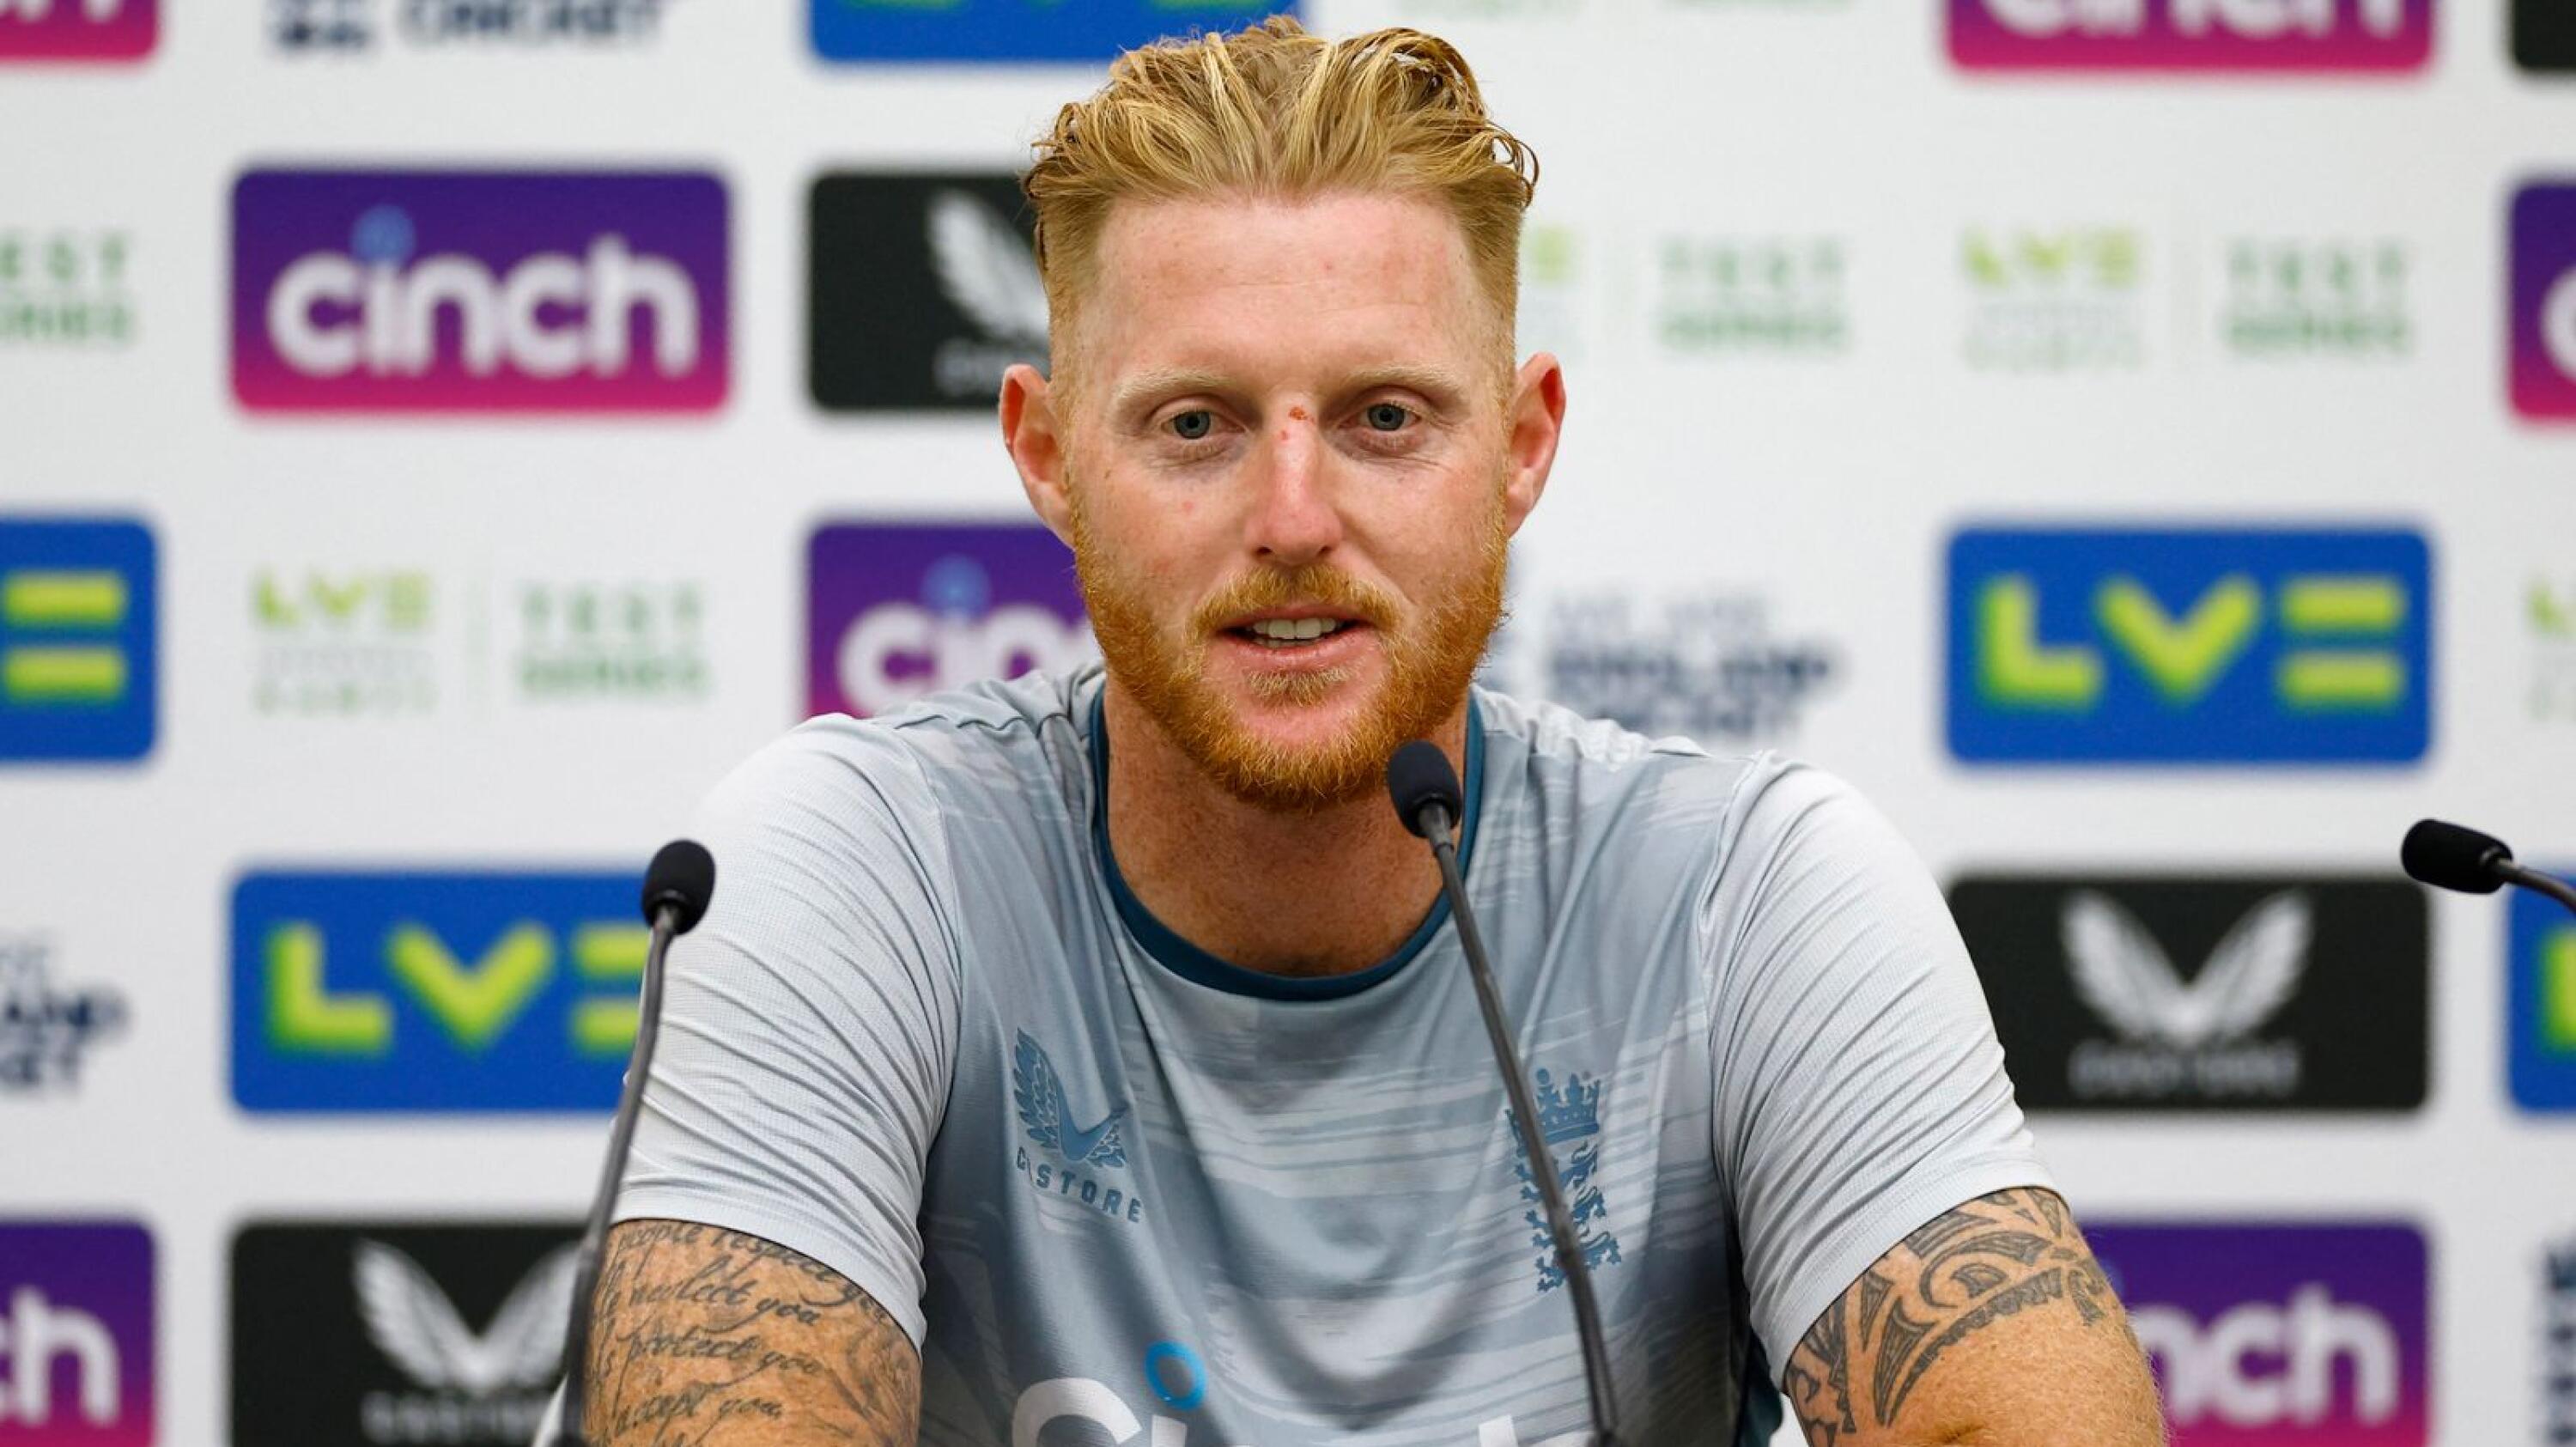 Ben Stokes speaks to the media during a press conference ahead of the third Test against SA at The Oval.